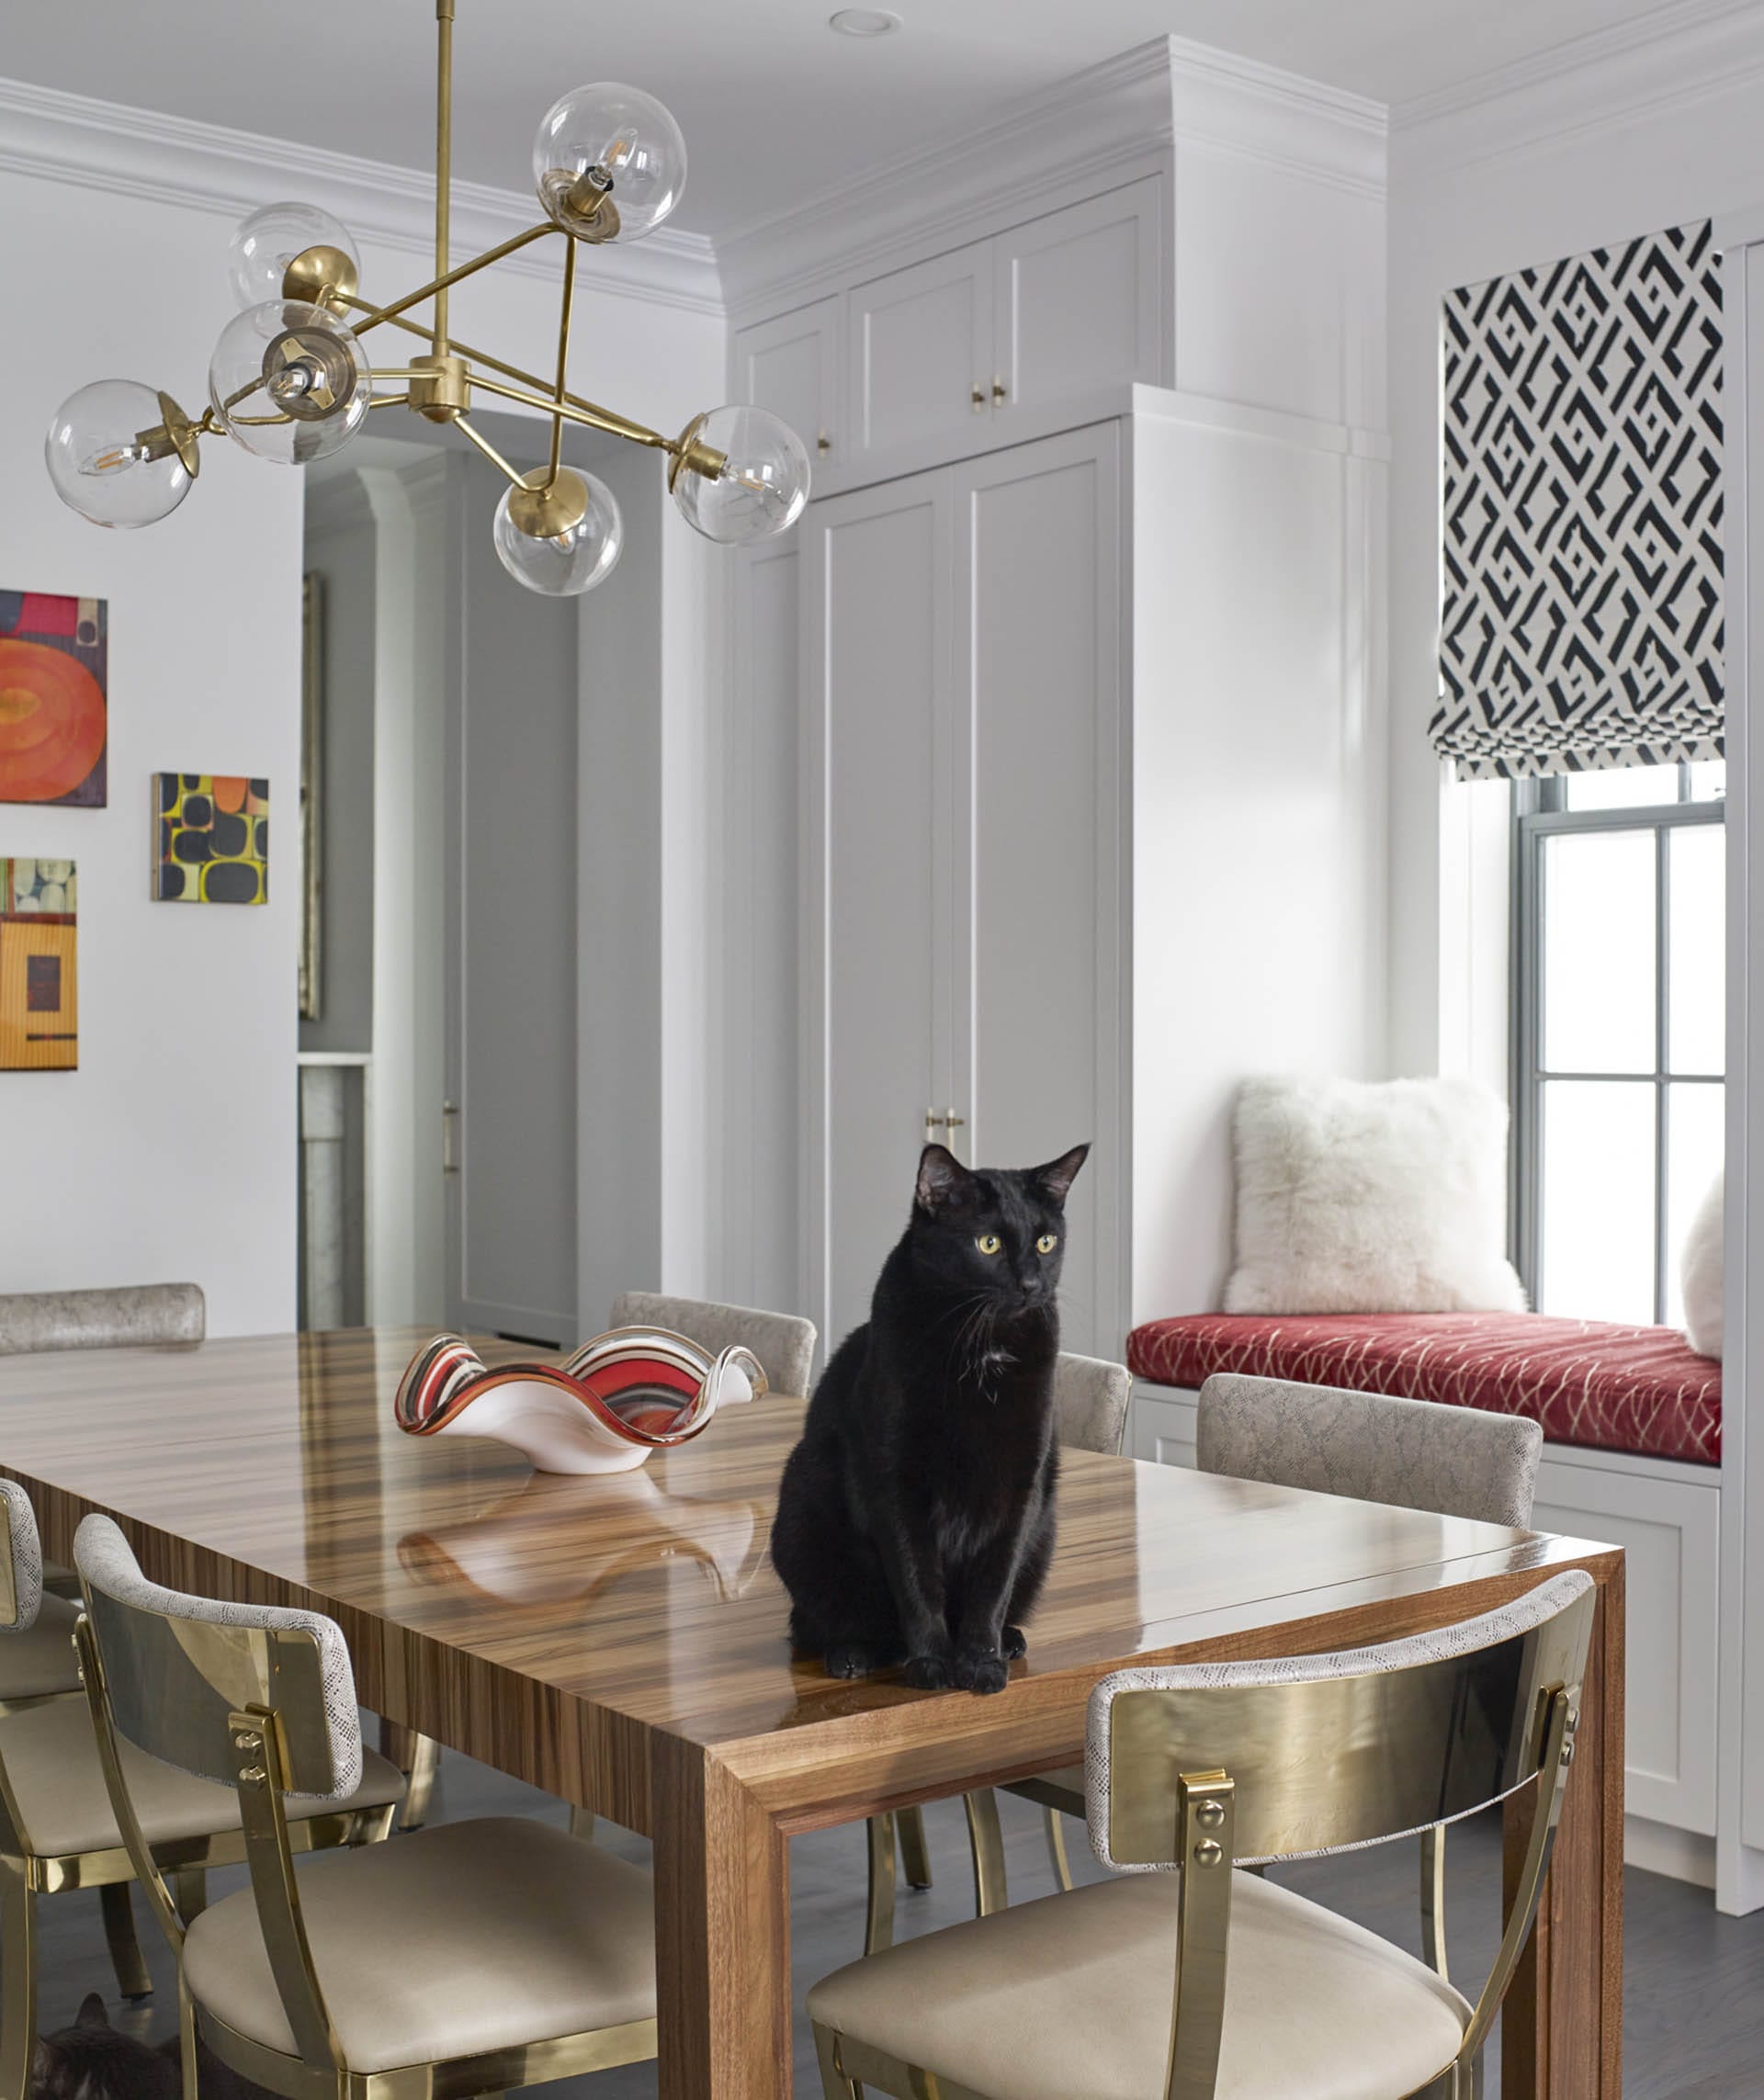 Dining room with a wood table, klismos chairs, a gold chandelier, and a black cat perched on the table.